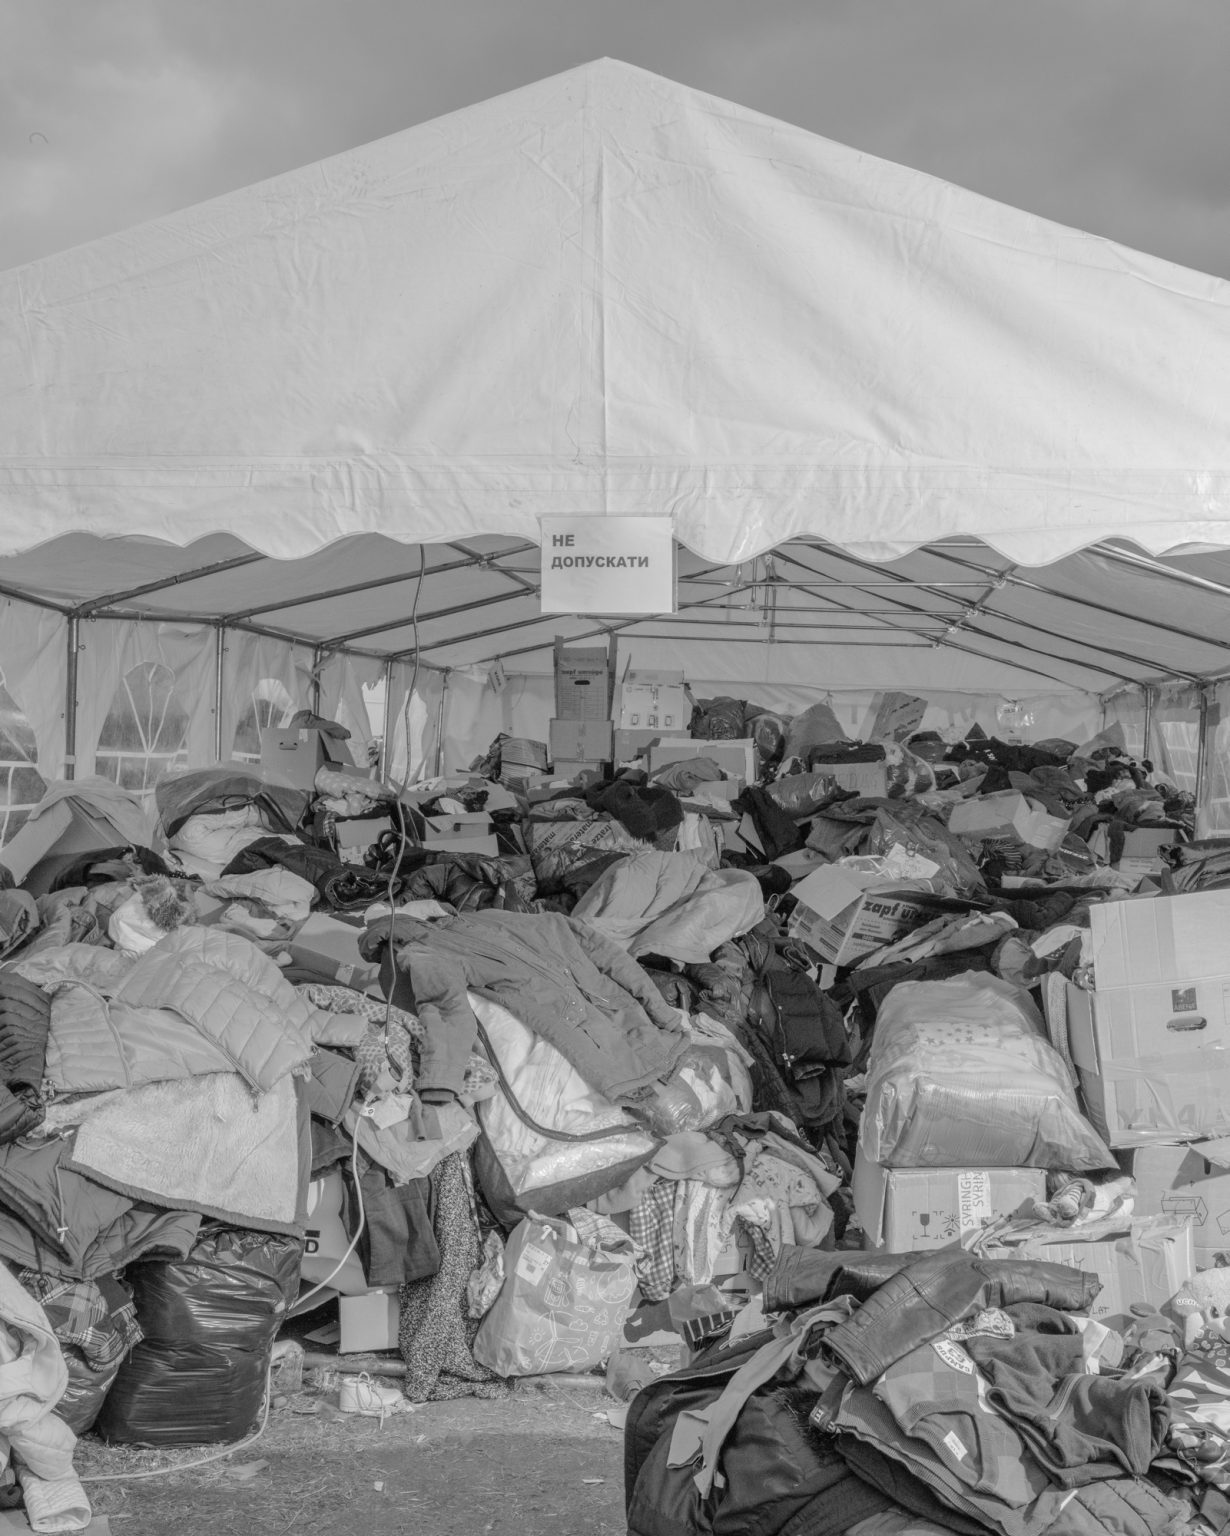 One of the many tents with any kind of donations at the Medyka's border. More than 600,000 Ukrainians fleeing the conflict have already crossed this border making Poland the country with the largest number of refugees with one million people welcomed. Medyka, Poland. March 2022.                                              As Russia invades Ukraine, thousands of Ukrainians are fleeing the country to find shelter in bordering countries. 
---------
Con l'invasione russa ai danni dell'Ucraina, migliaia di ucraini sono in fuga dalla nazione d'origine per cercare rifugio nelle nazioni confinanti.